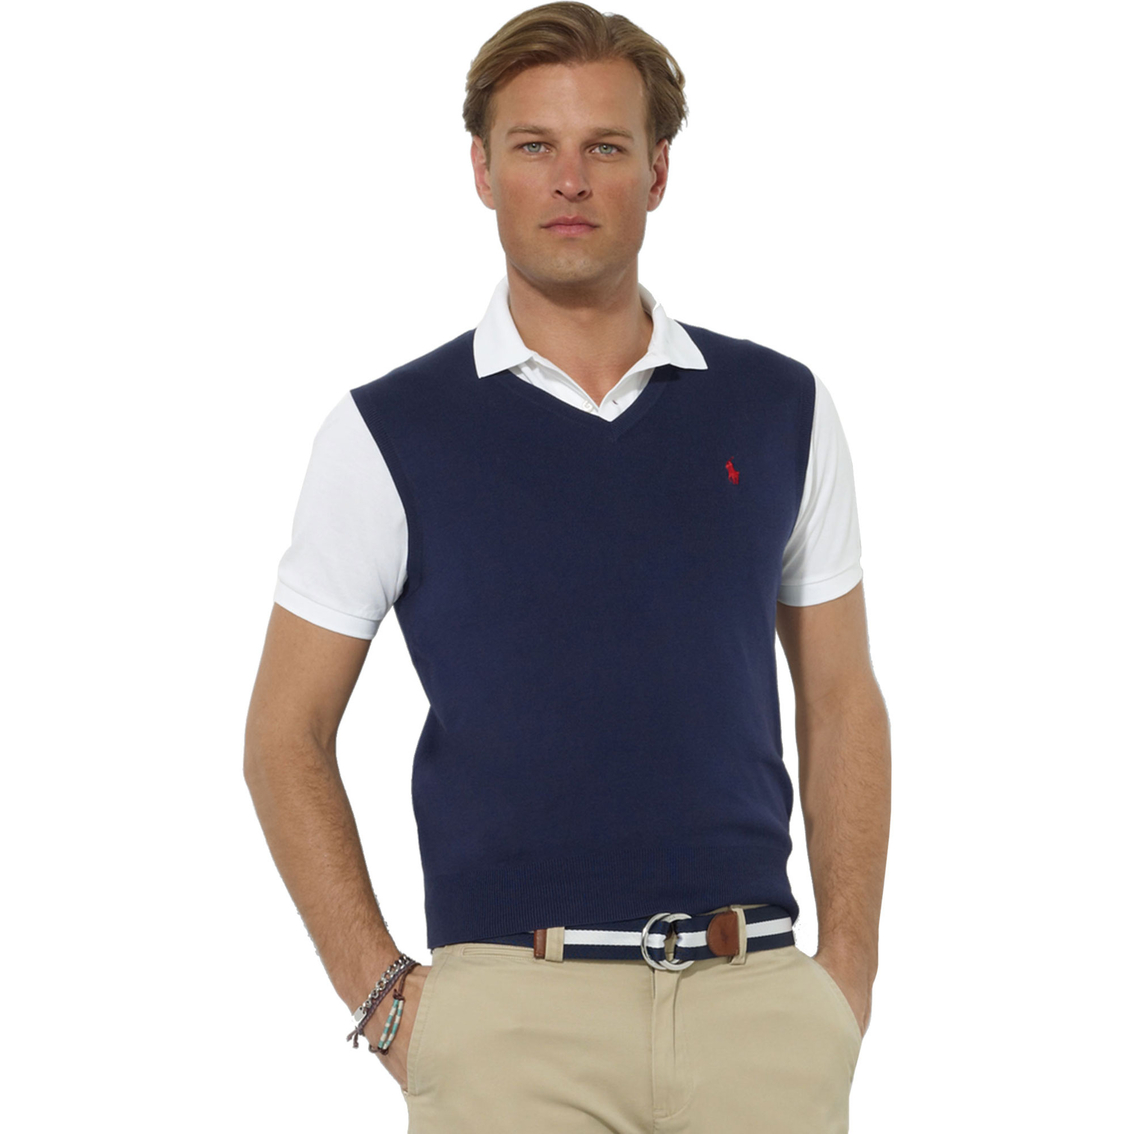 watchesdesignsite: Mens Dress Sweater Vest And Polo Dhirt